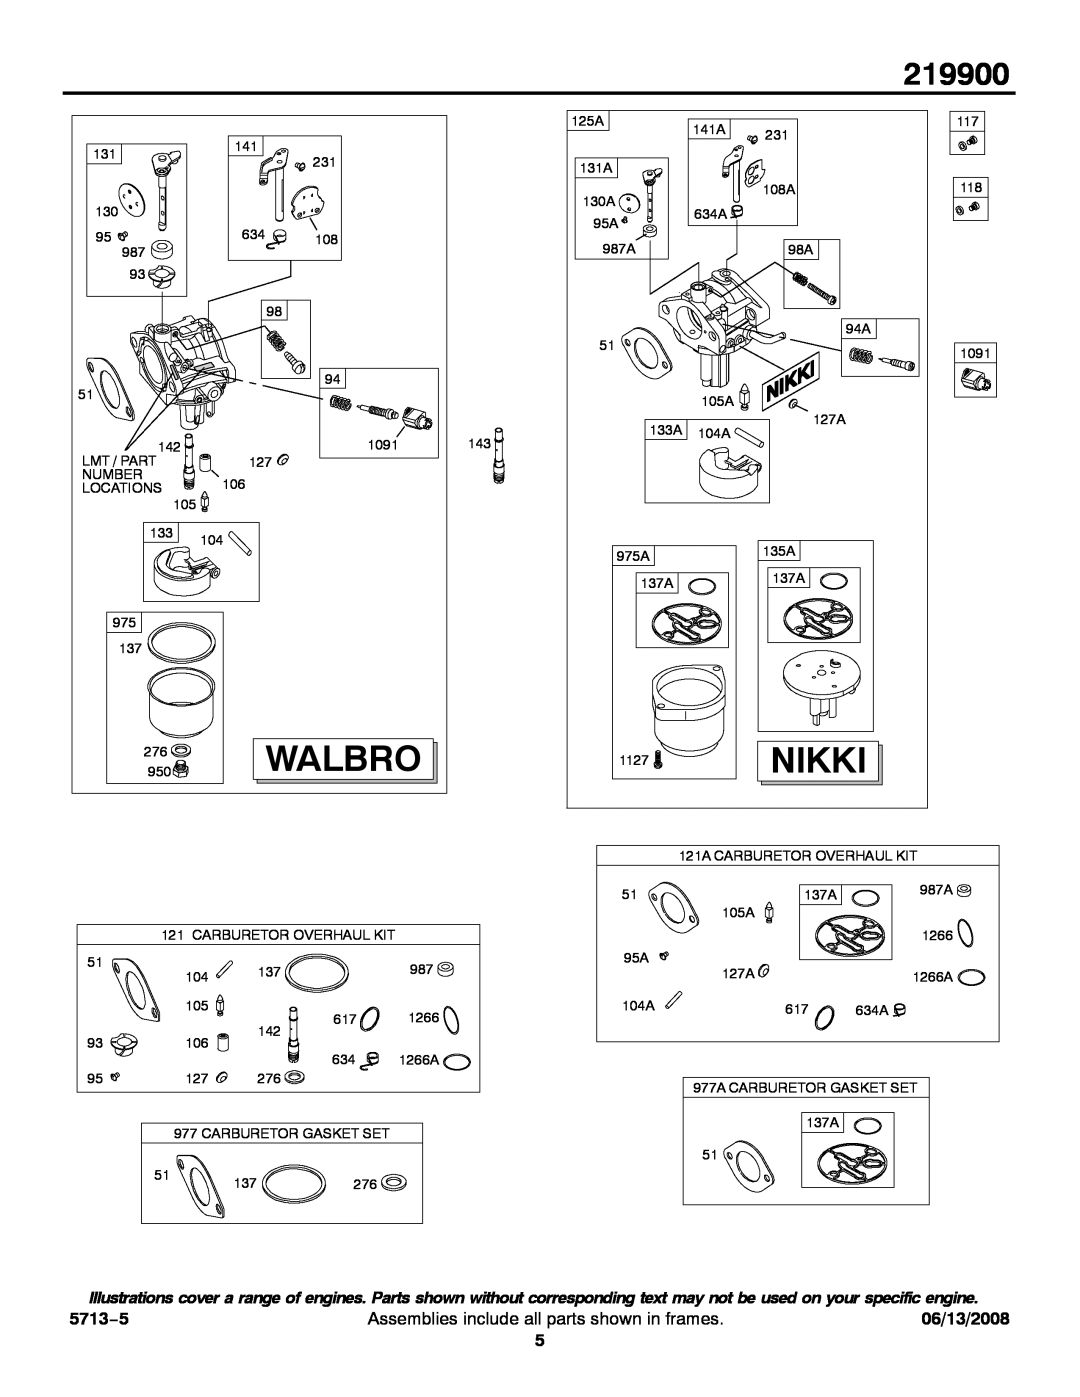 Snapper 219900 service manual Nikki, 5713−5, Walbro, Assemblies include all parts shown in frames, 06/13/2008 